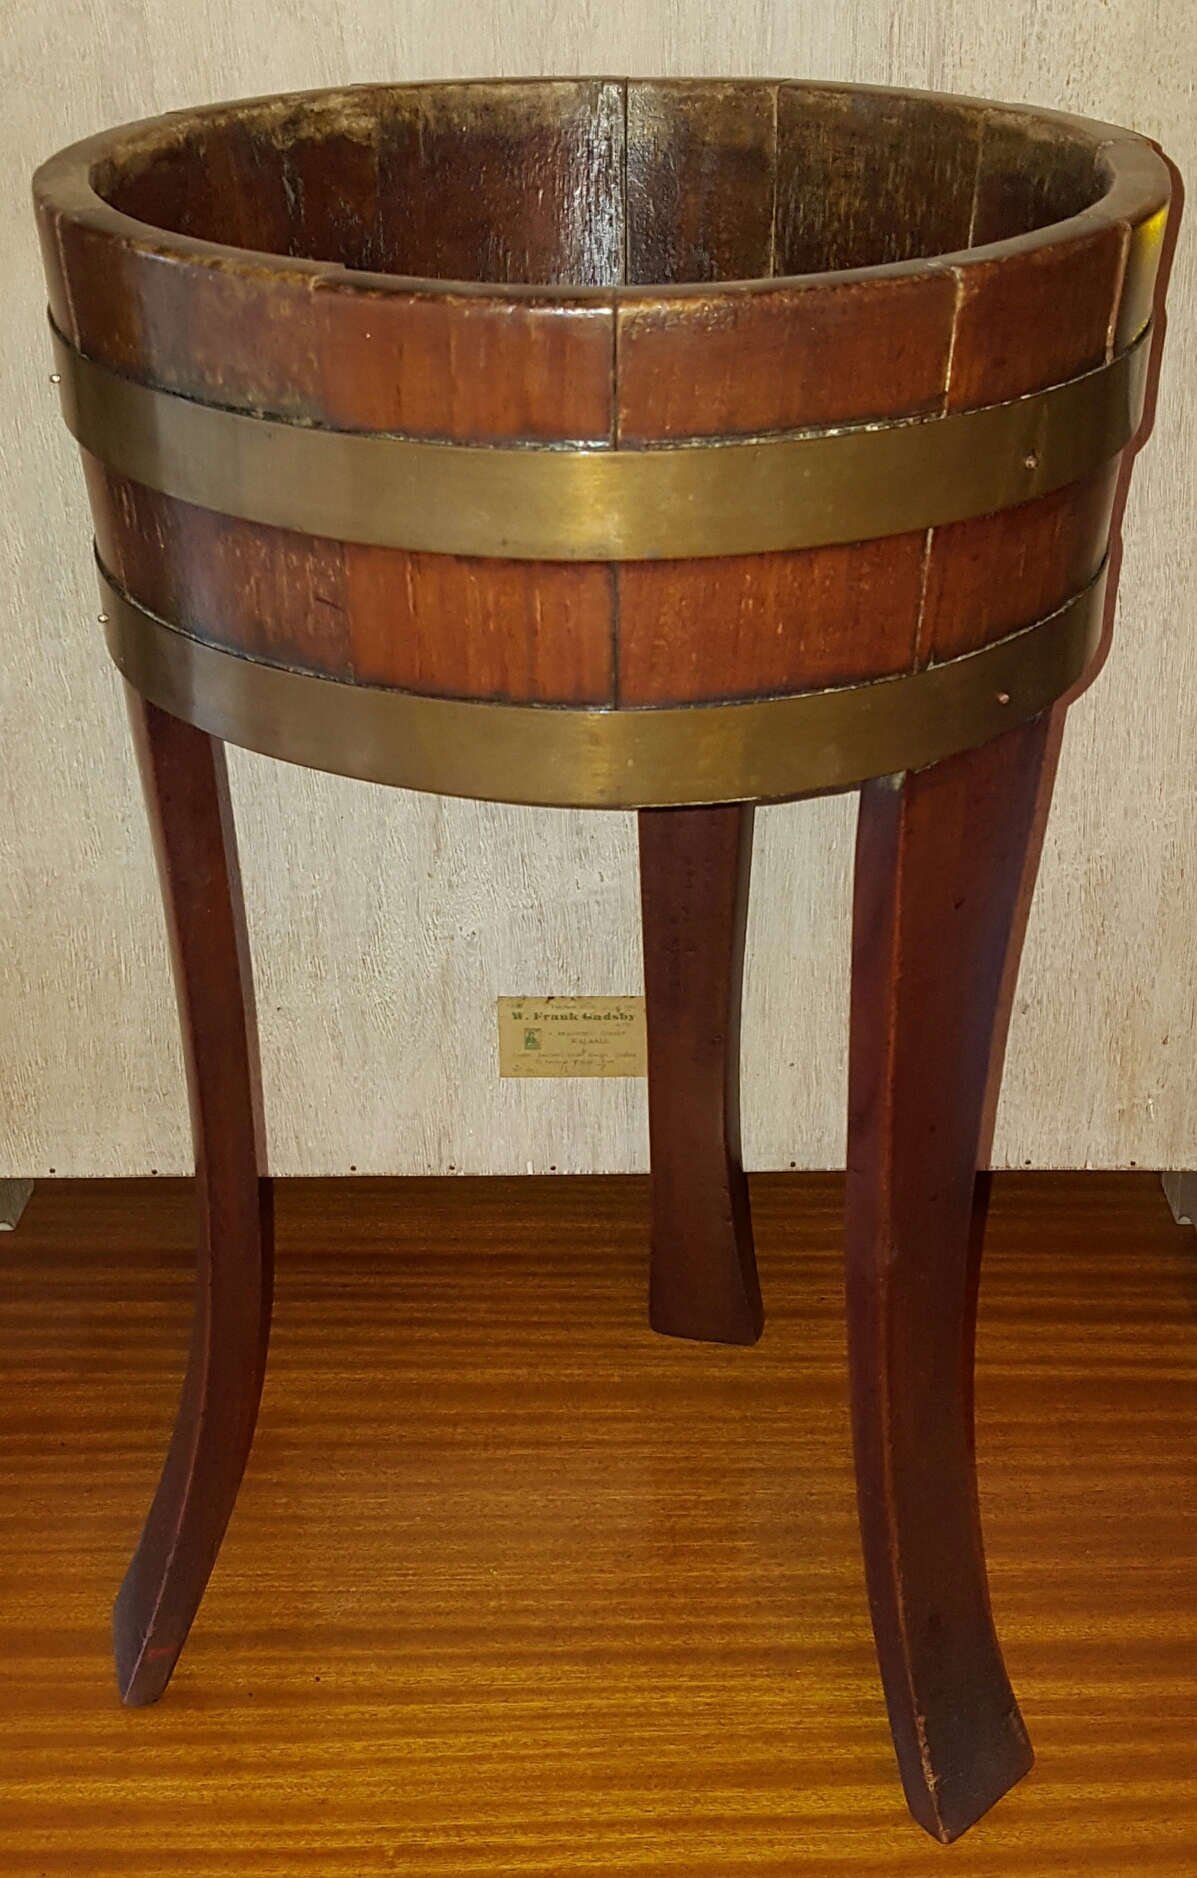 Vintage Wooden Plant Stand or Ice Bucket Stand